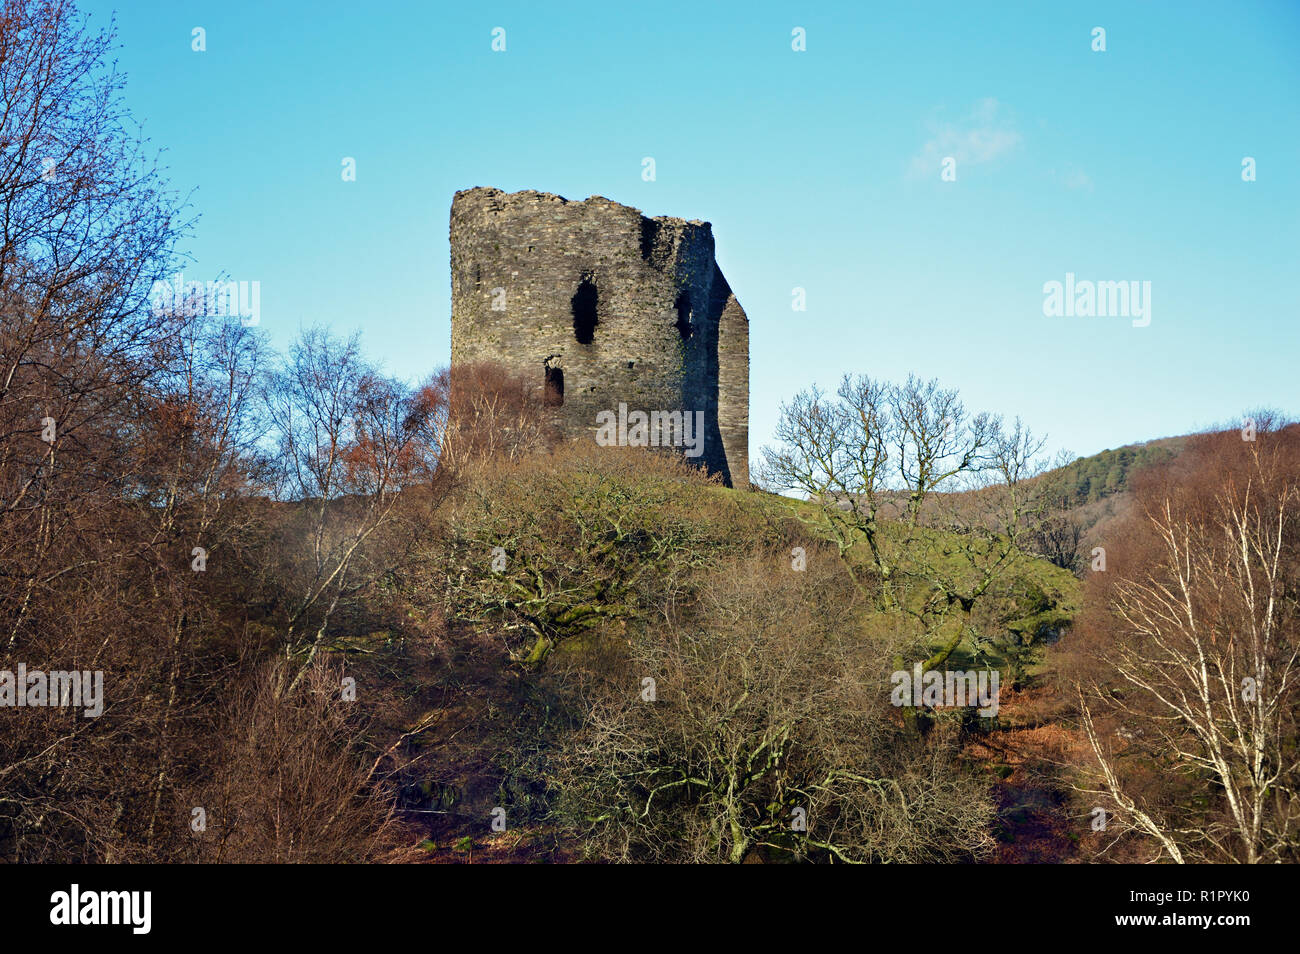 Dolbadarn Castle, close to Llanberis in North Wales, was built in the early 13th century by the Welsh Prince known as Llywelyn the Great. Stock Photo